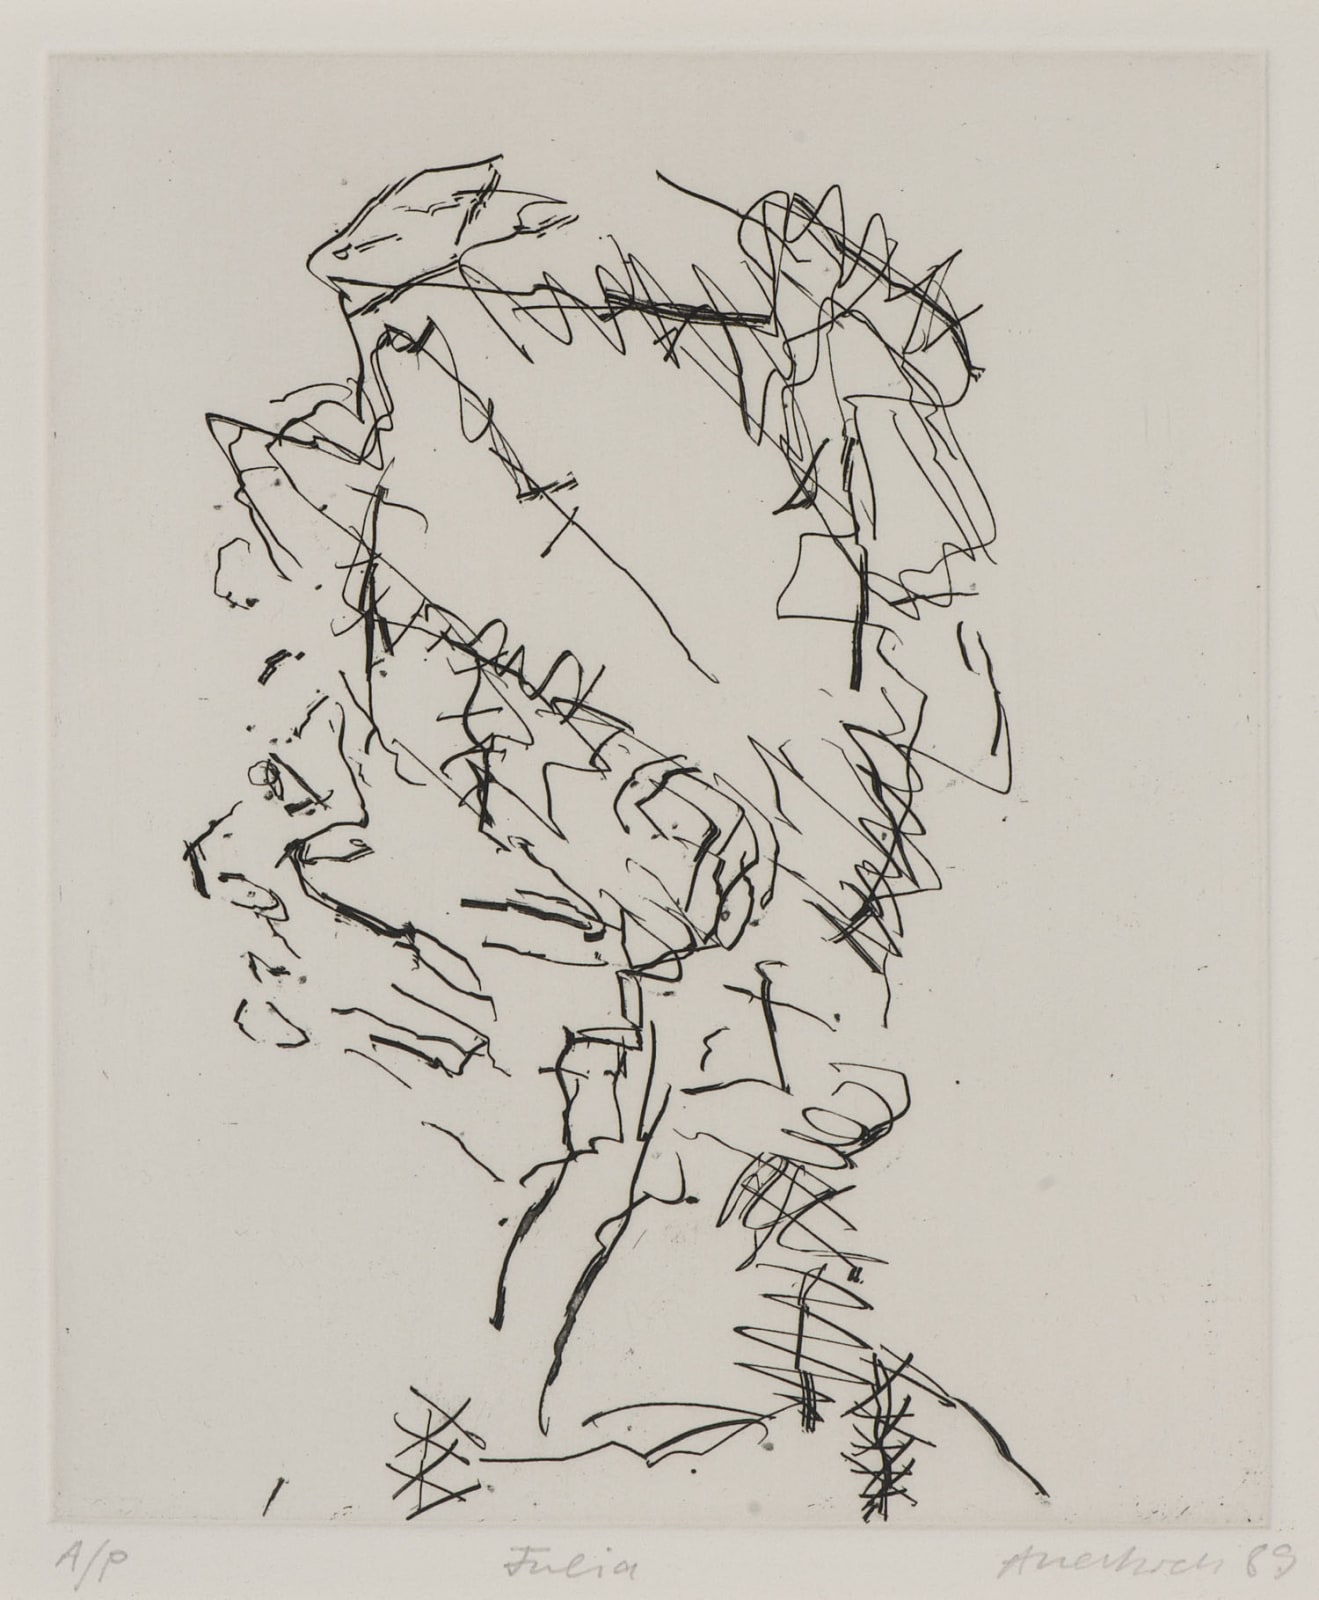 Frank Auerbach (1931-) Julia, Series: Part of Seven Portraits 1989 Etching, printed on Somerset white paper, artist's proof outside the published edition of 50 19.5 x 16.5 cm Ben Uri Collection © Frank Auerbach, courtesy Marlborough Fine Art To see and discover more about this artist click here